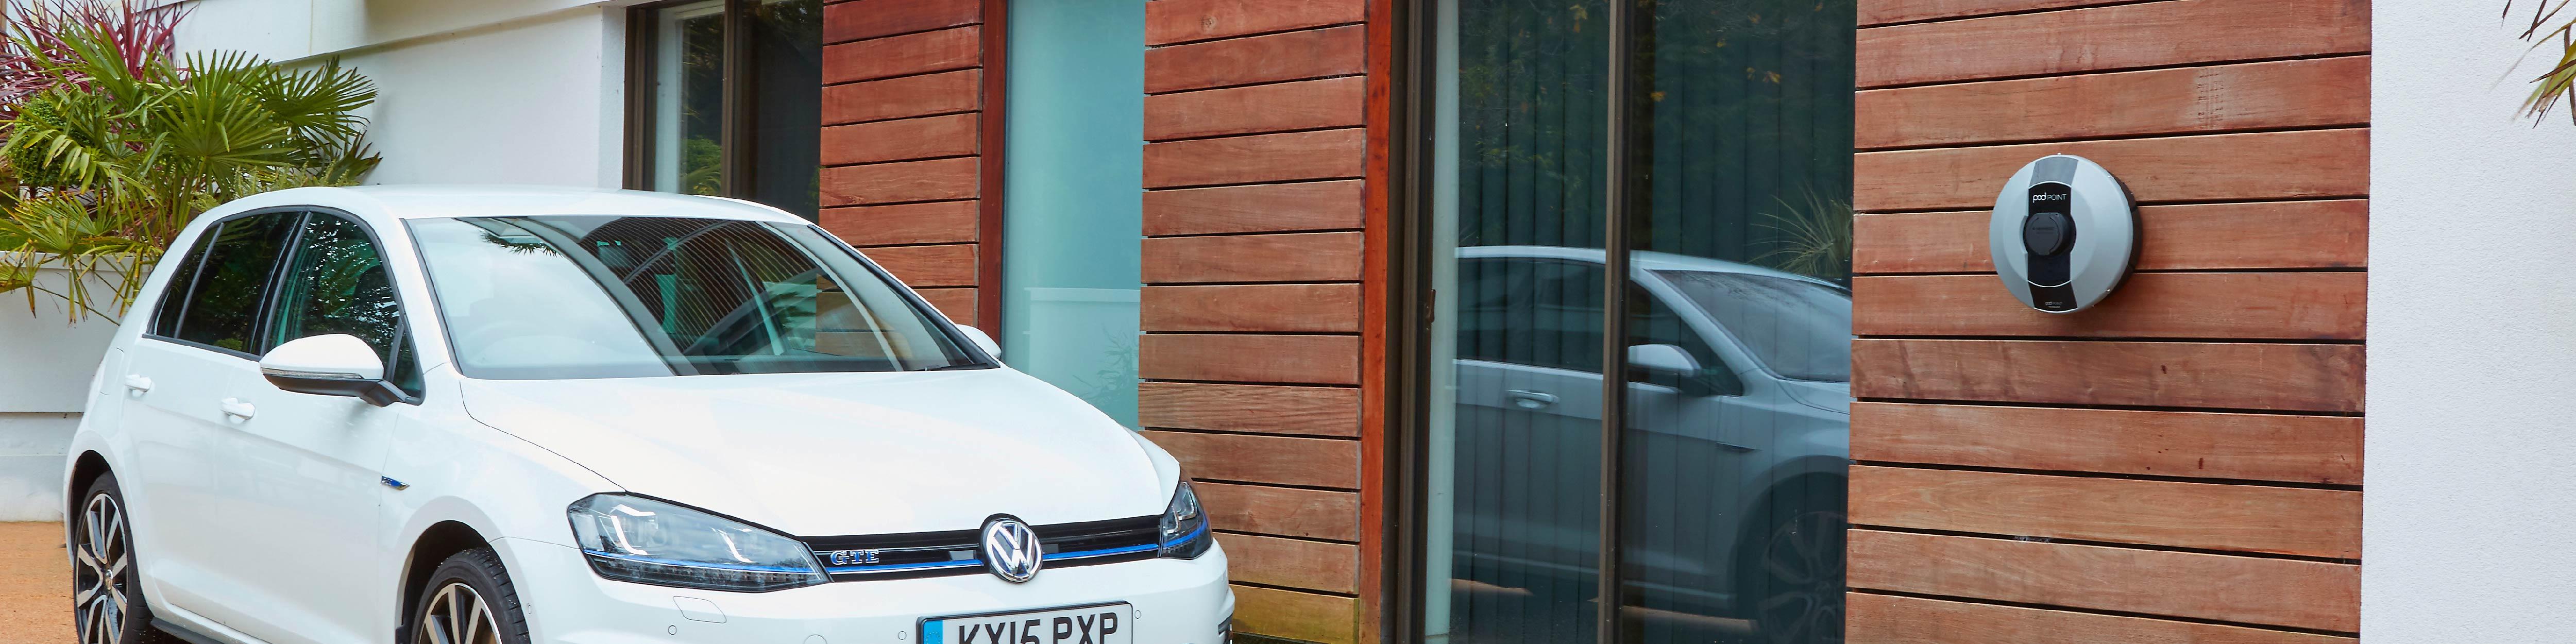 Preferred Supplier for VW Charging Stations in the UK